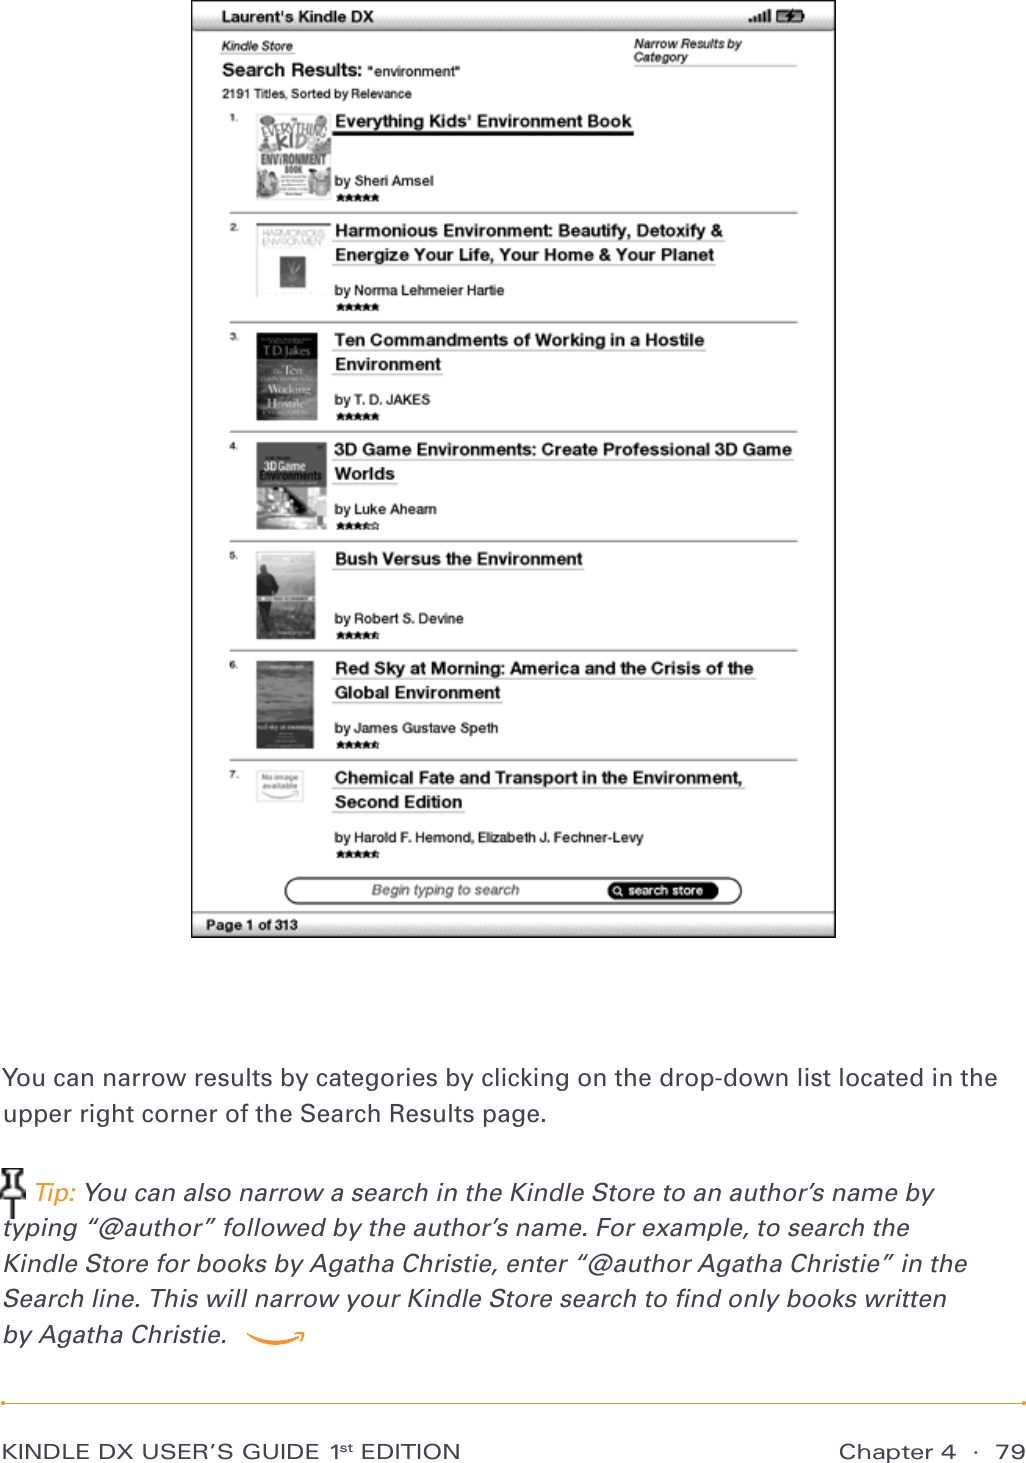 Chapter 4  ·  79KINDLE DX USER’S GUIDE 1st EDITIONYou can narrow results by categories by clicking on the drop-down list located in the upper right corner of the Search Results page. Tip: You can also narrow a search in the Kindle Store to an author’s name by typing “@author” followed by the author’s name. For example, to search the  Kindle Store for books by Agatha Christie, enter “@author Agatha Christie” in the  Search line. This will narrow your Kindle Store search to ﬁnd only books written  by Agatha Christie.